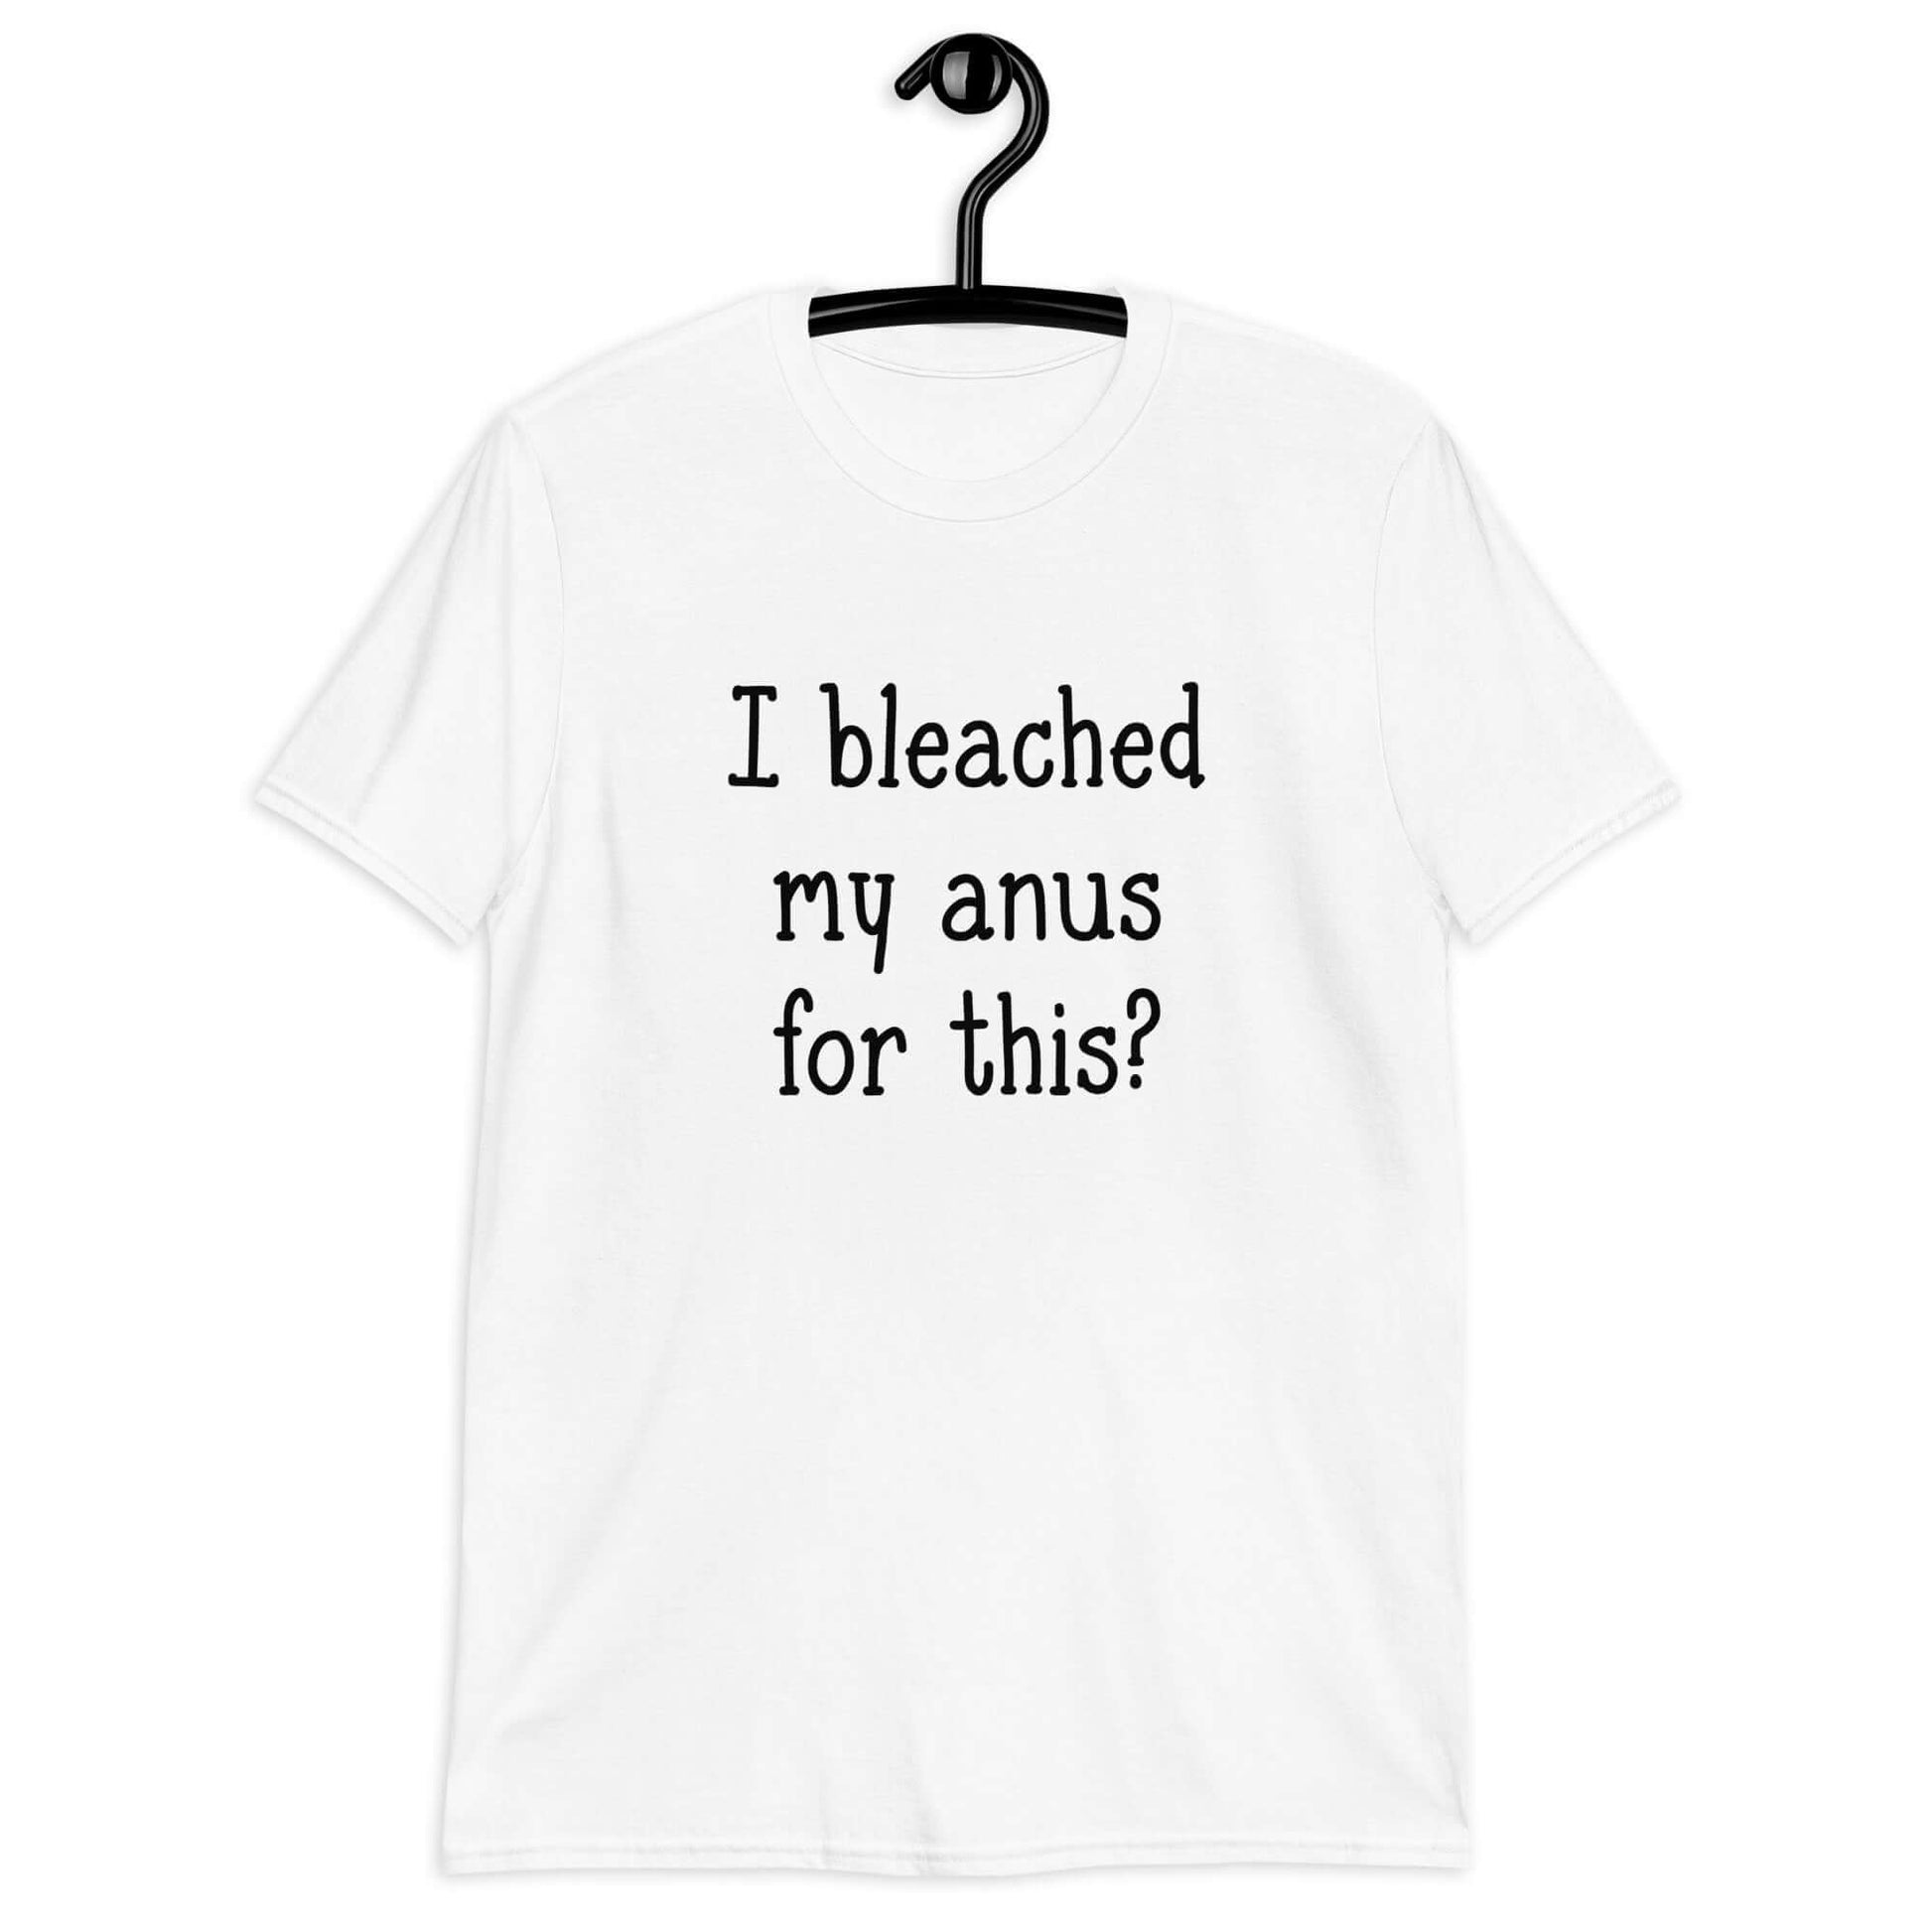 white t-shirt that has "I bleached my anus for this?" printed on the front